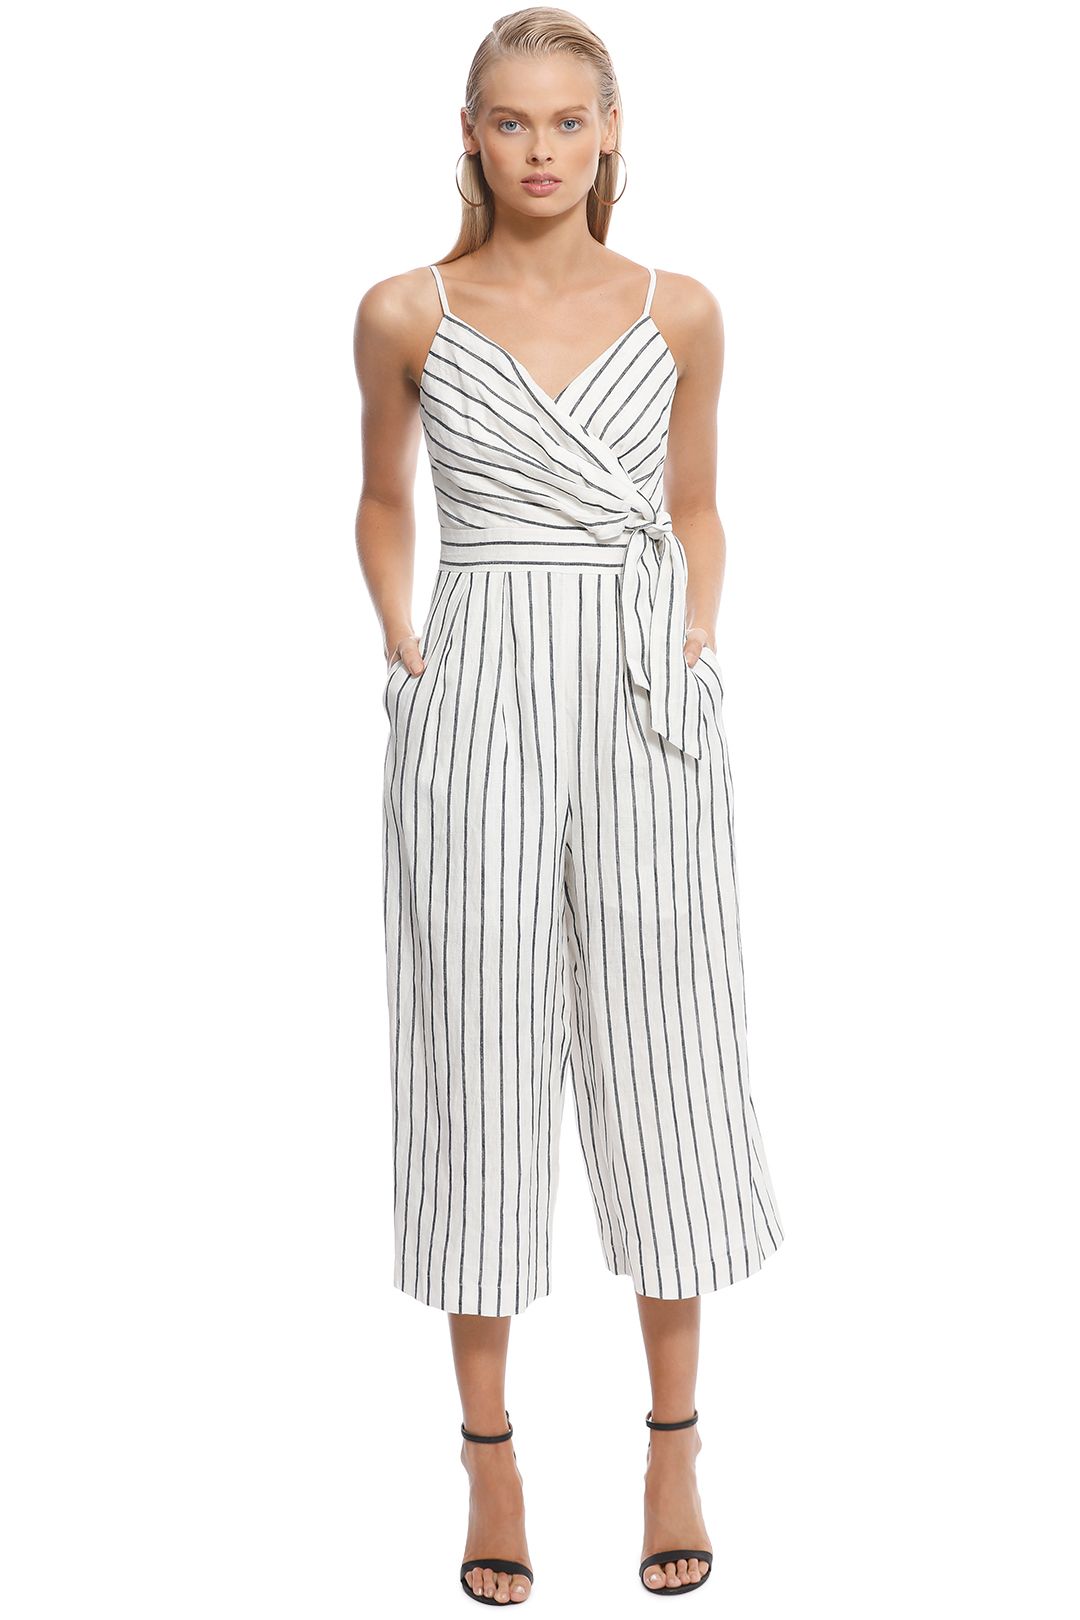 Sail Away Jumpsuit by Sheike for Rent | GlamCorner